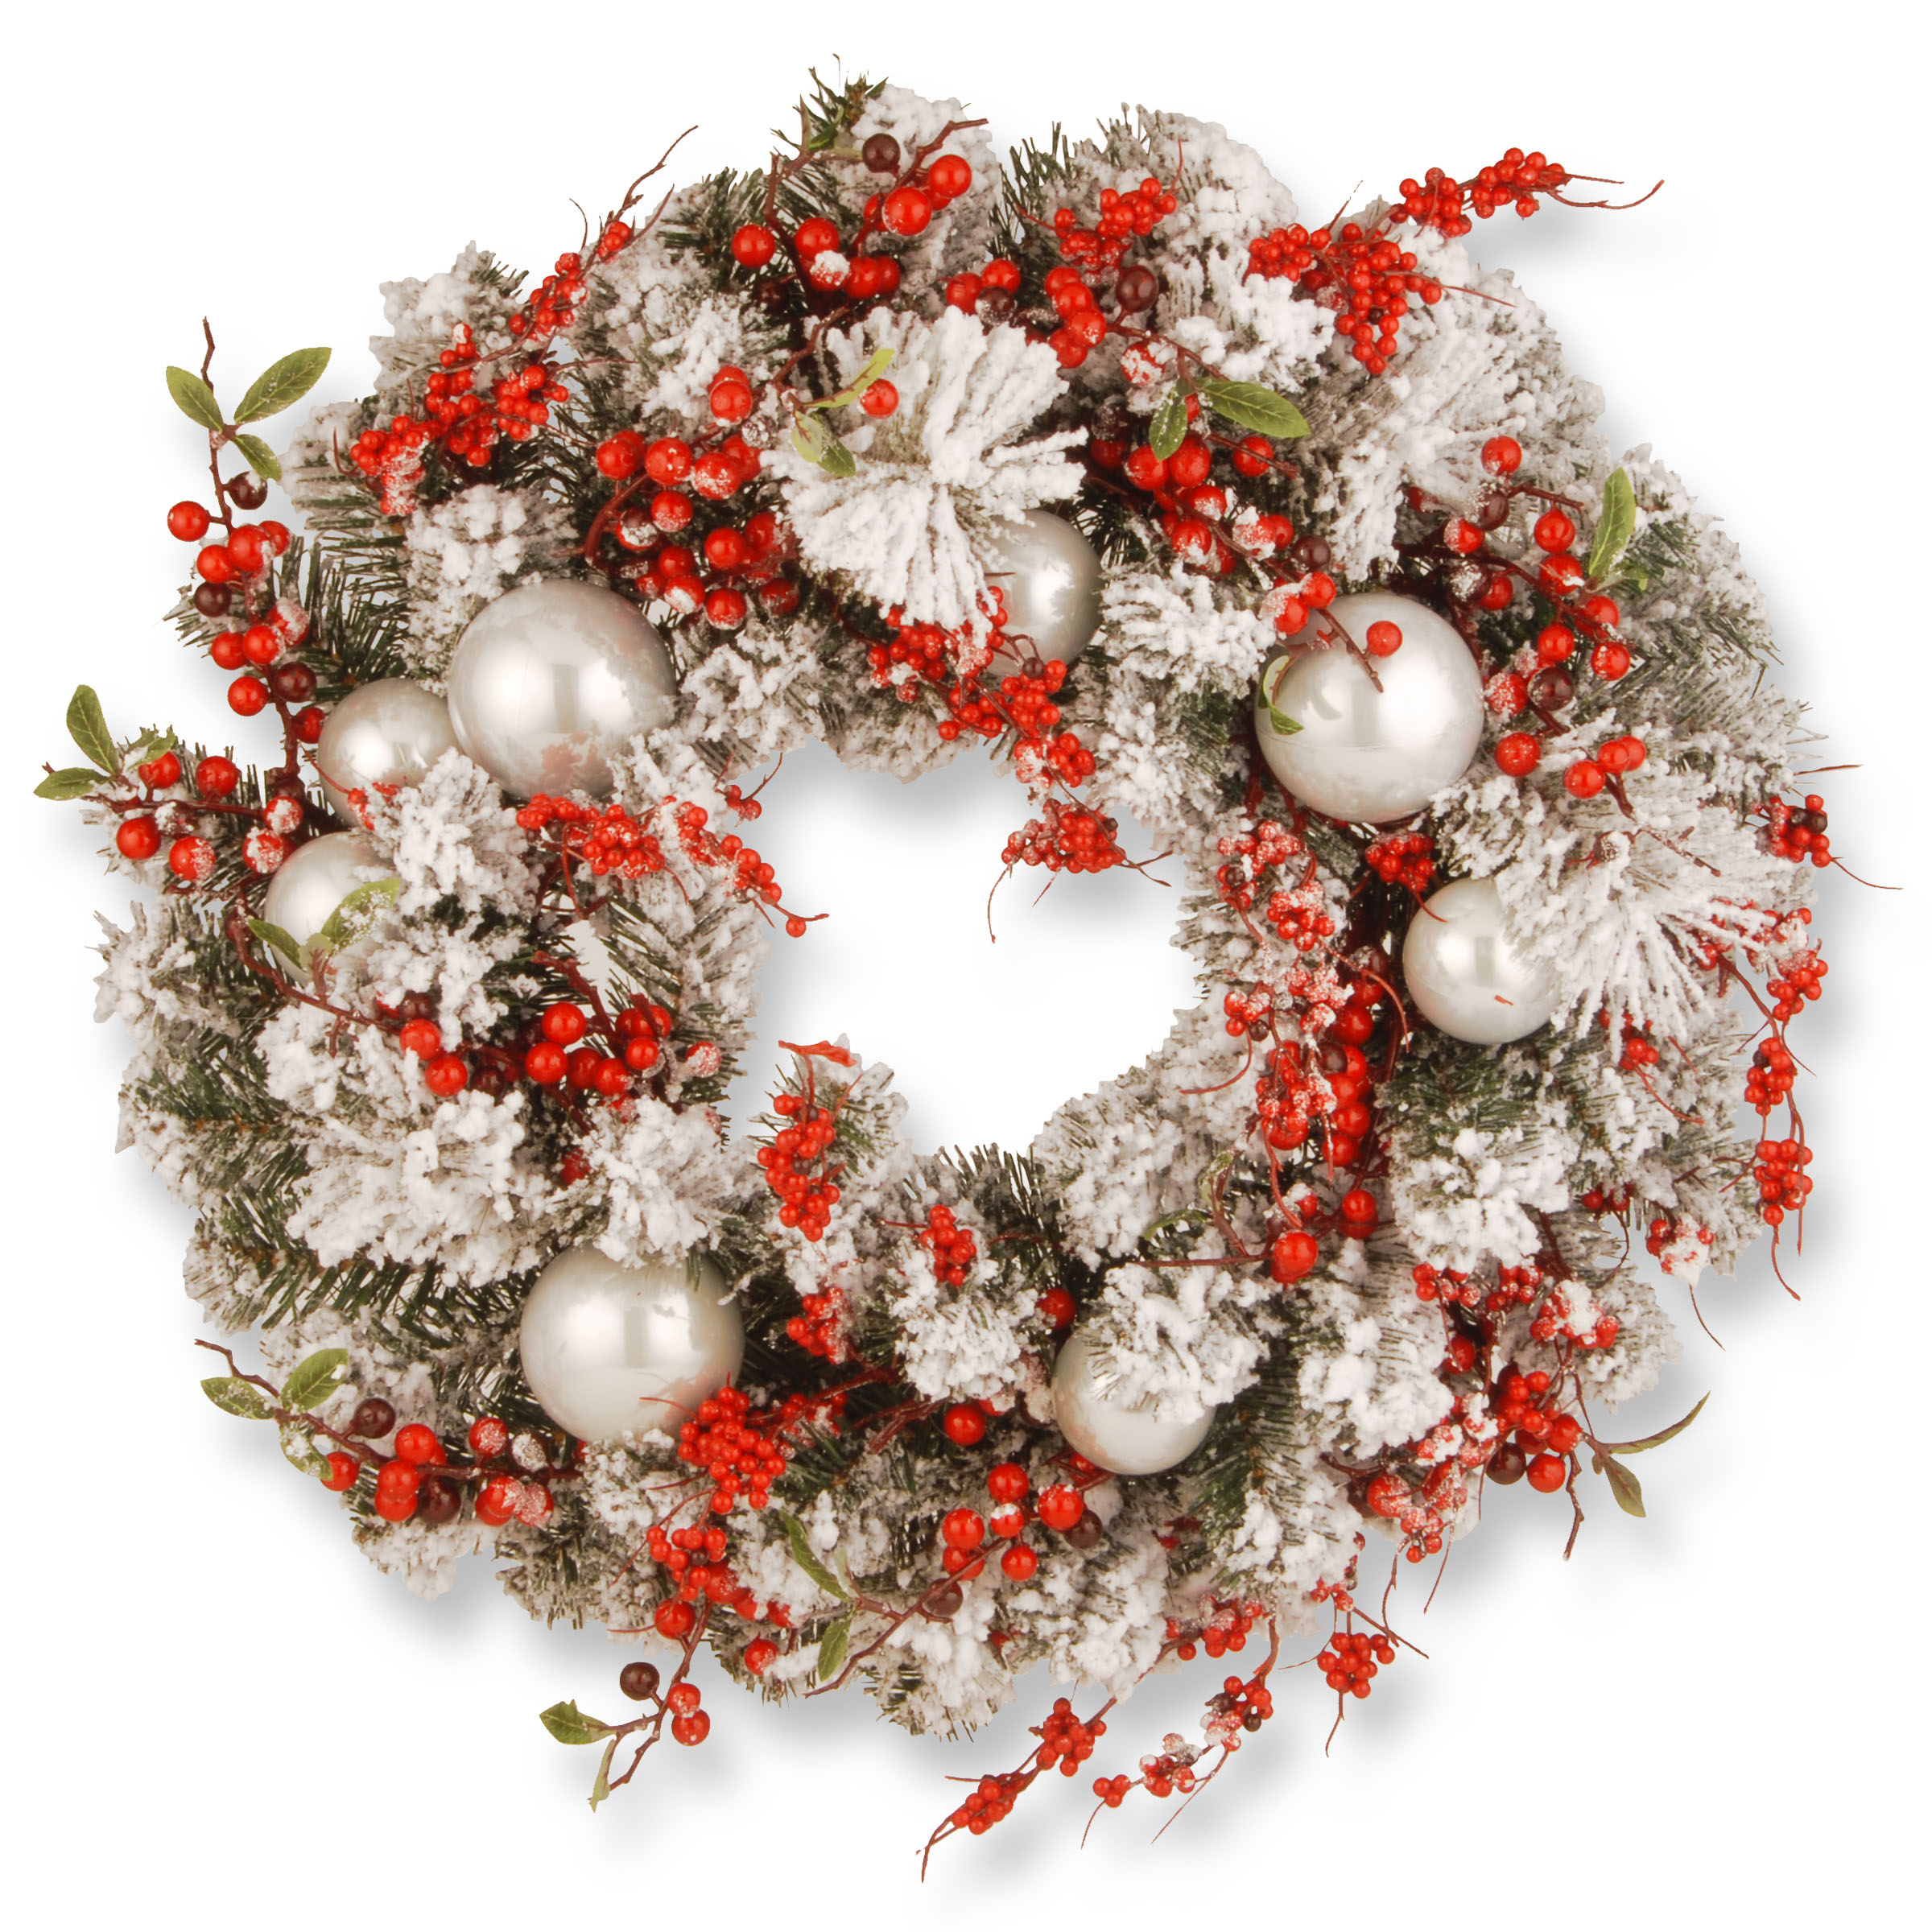 24 Inch Red And White Christmas Ornament Wreath: Unlit